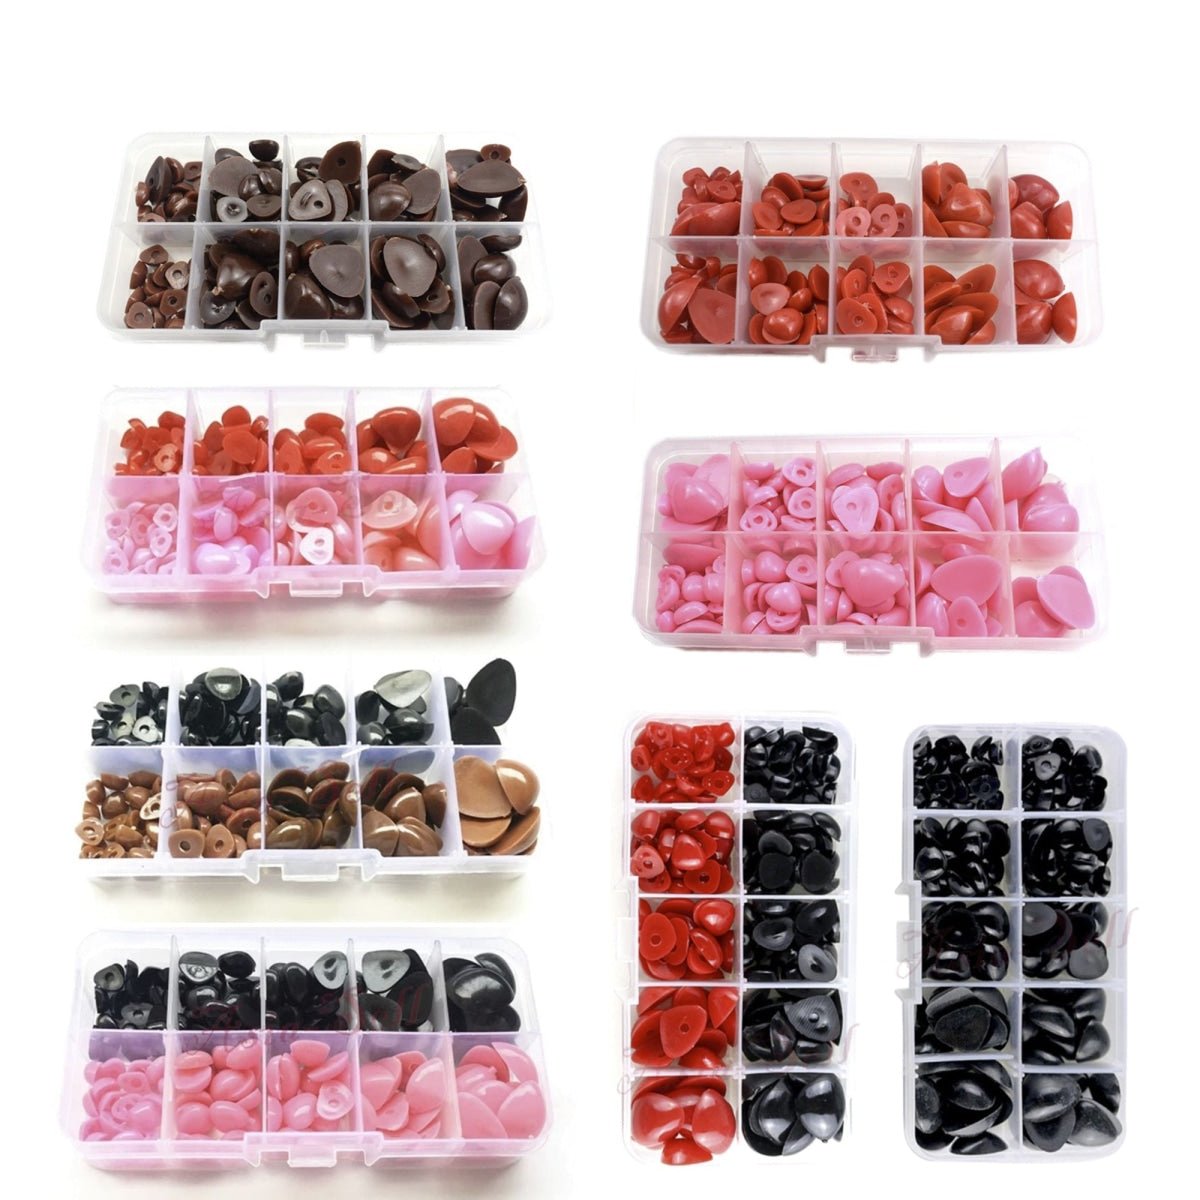 150pcs Set Plastic Toy Noses Triangle Nose Black Brown Pink Bear Puppet Dolls Toy - Black and Brown - - Asia Sell